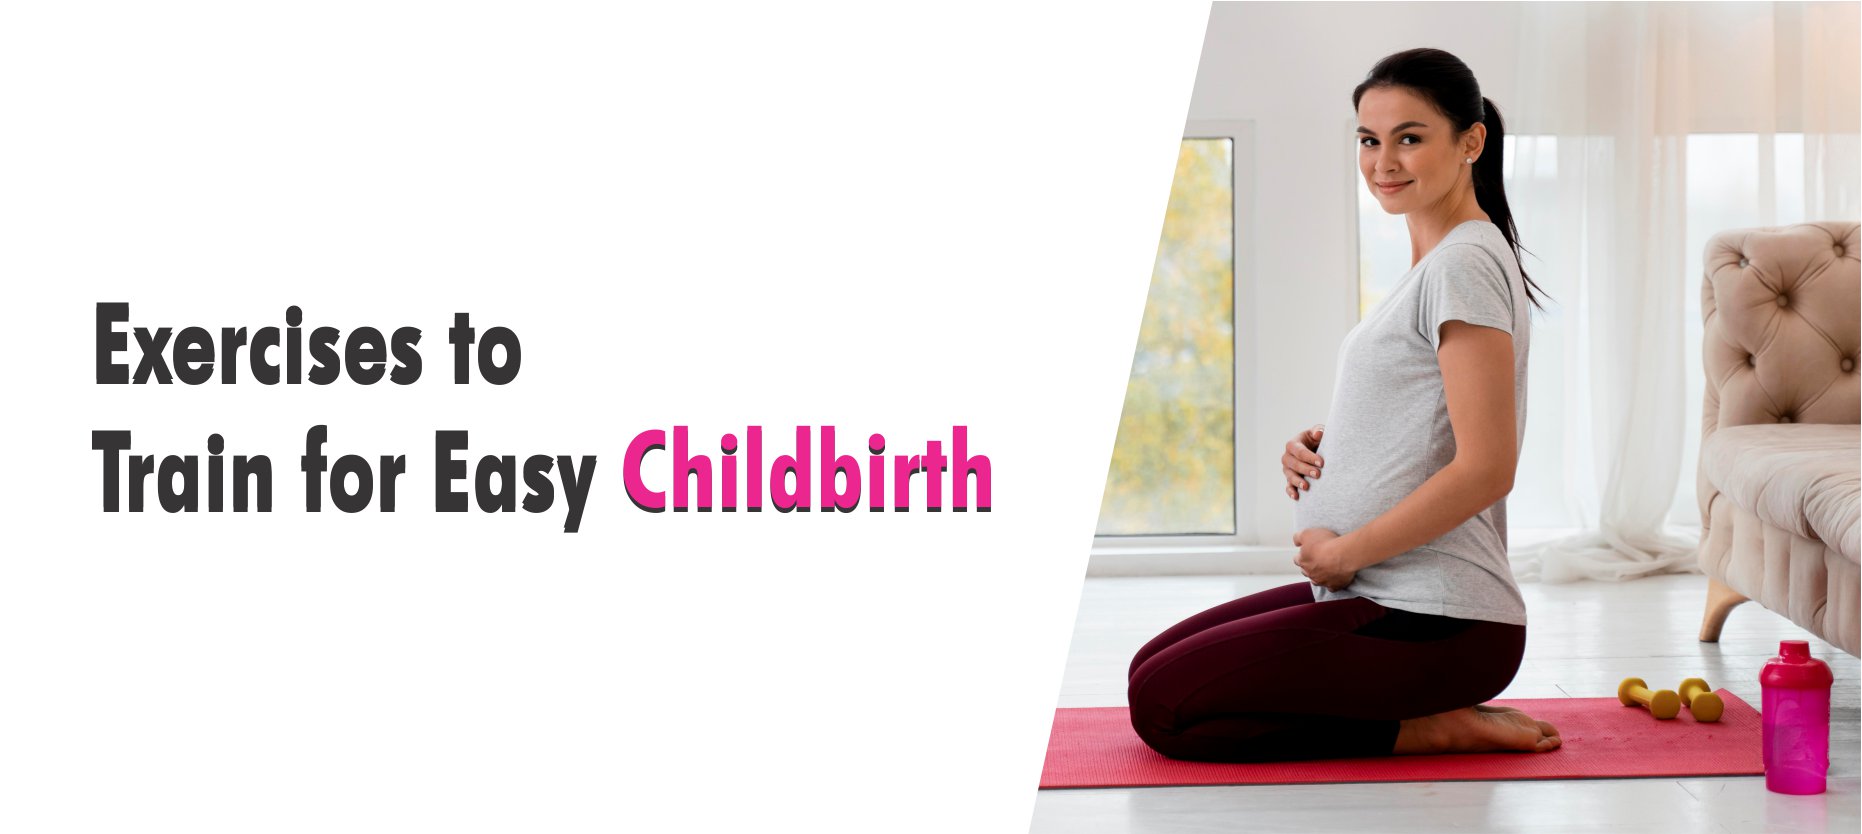 Exercises for easy childbirth